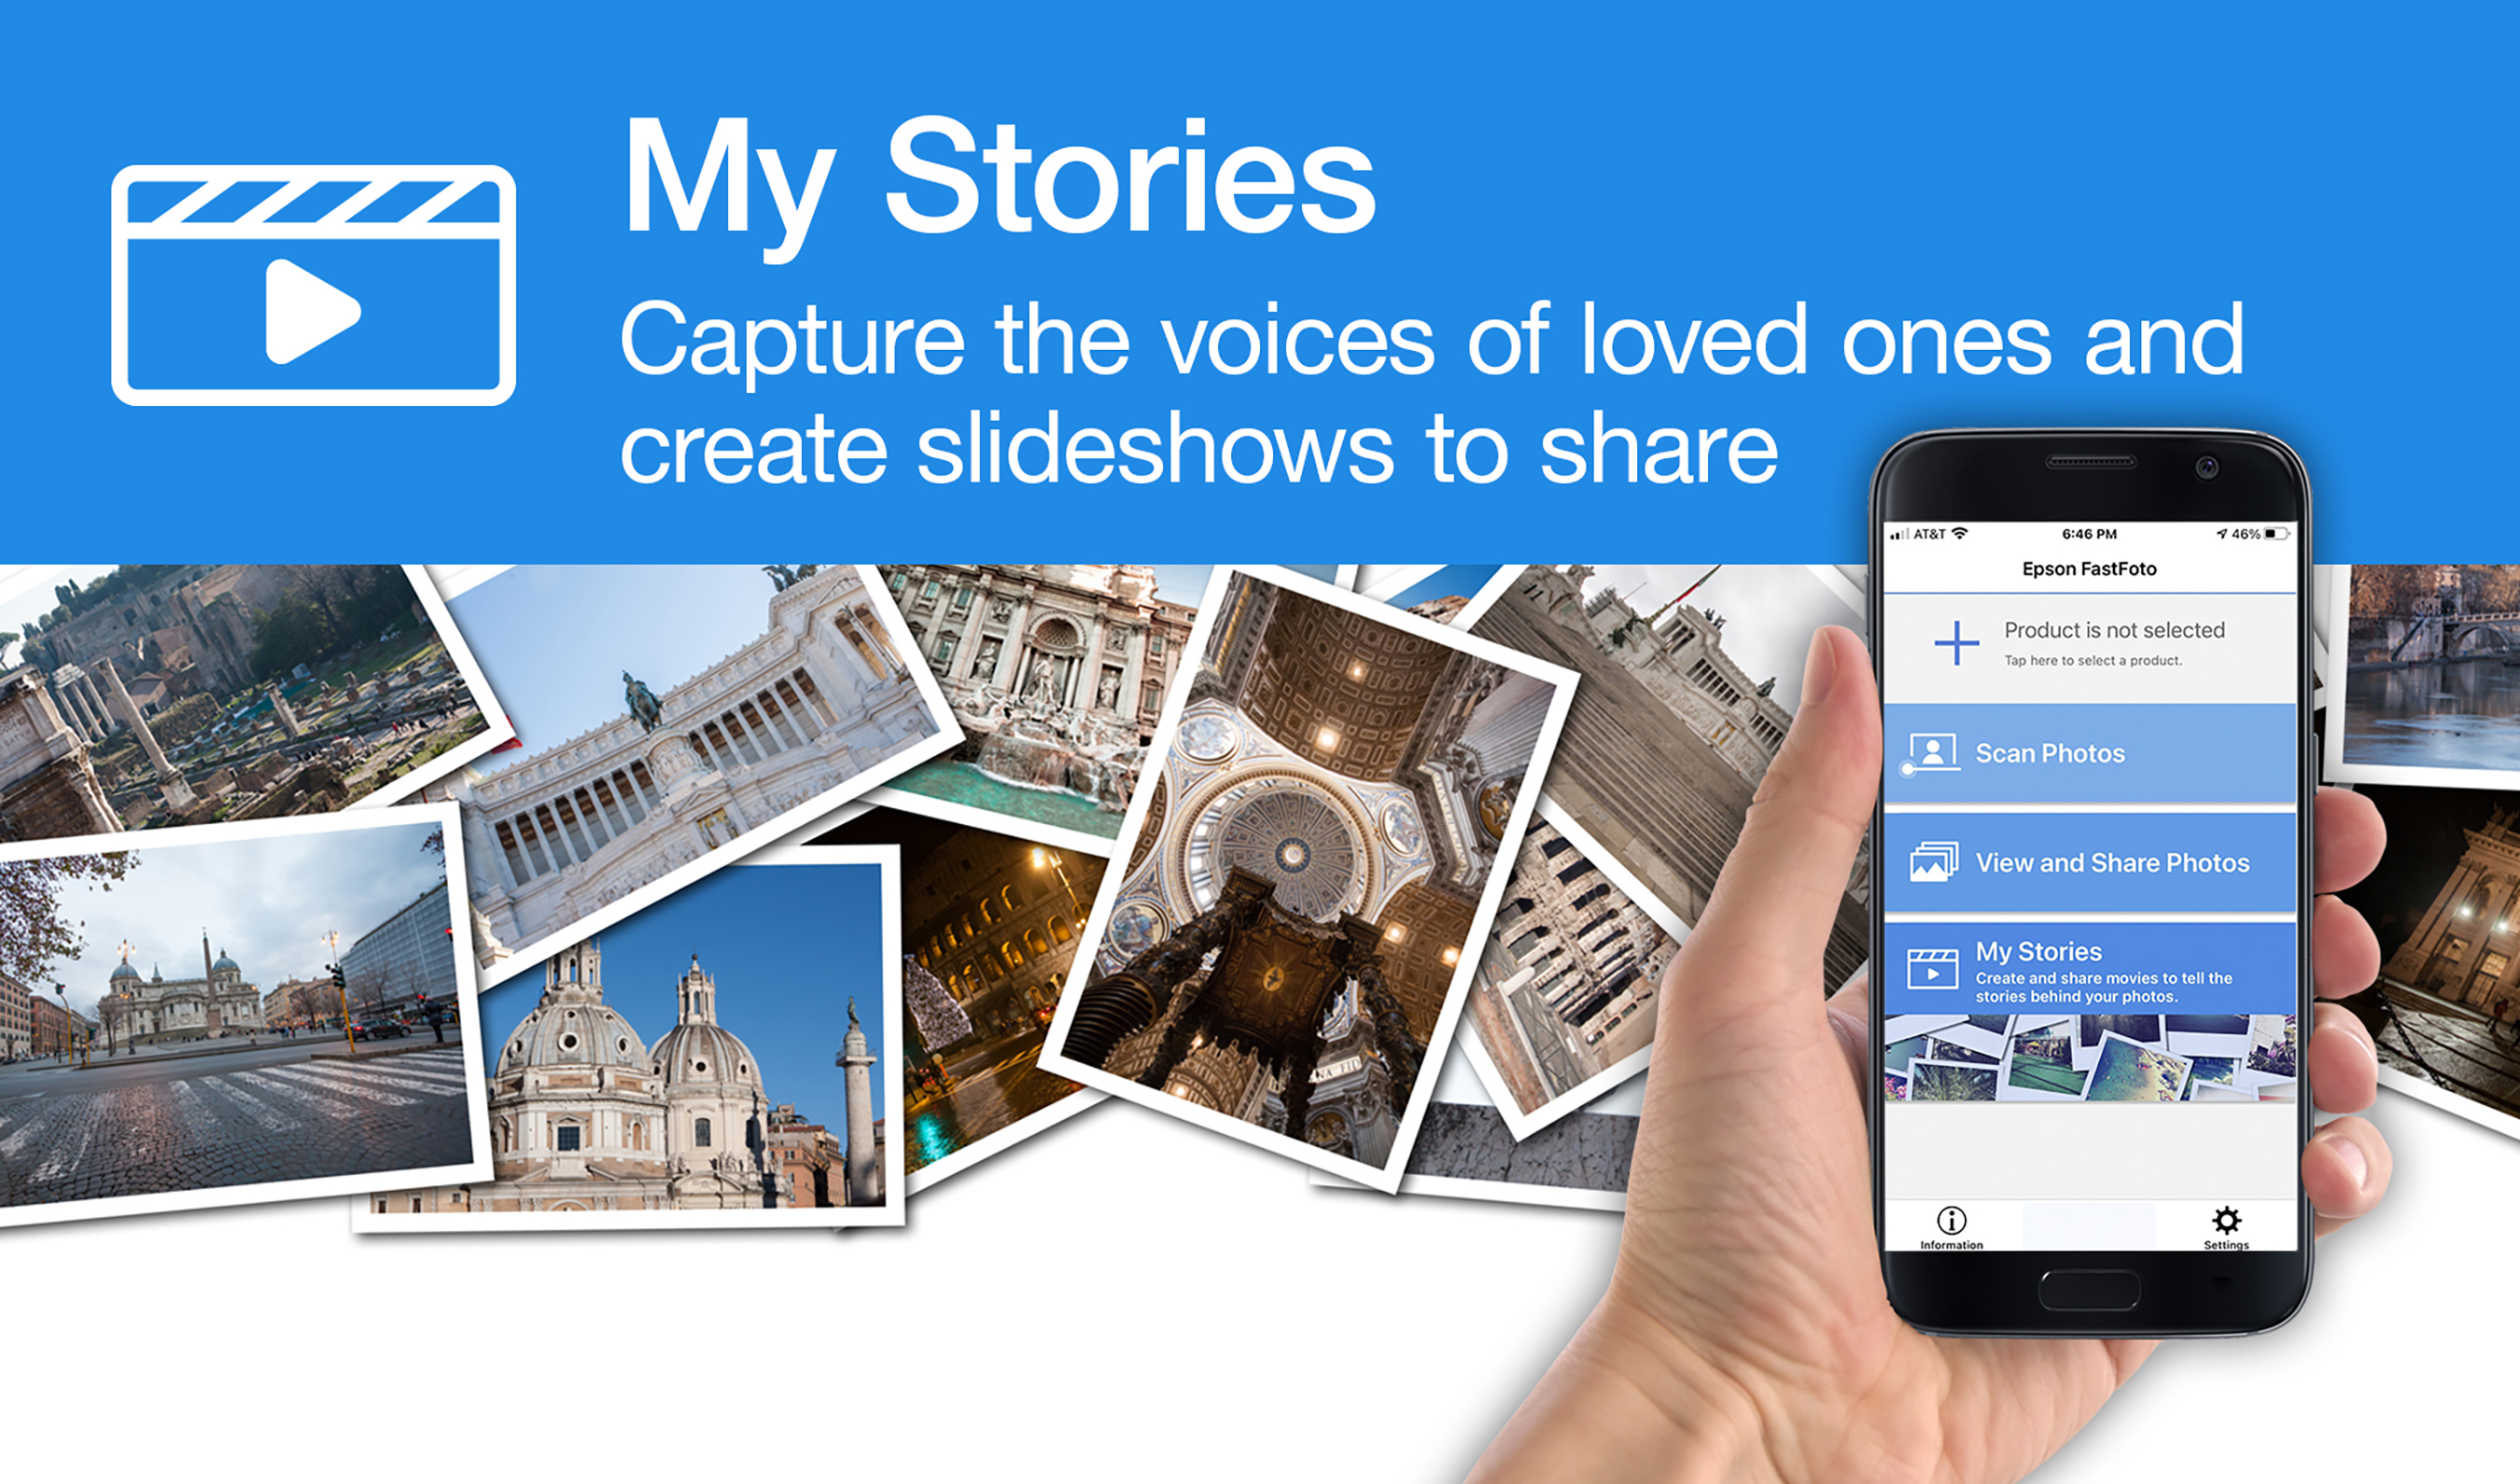 Together with the Epson FastFoto app, capture the voice of loved ones and create custom videos from an iOS® or AndroidTM smartphone or device, and relive treasured moments for generations to come.